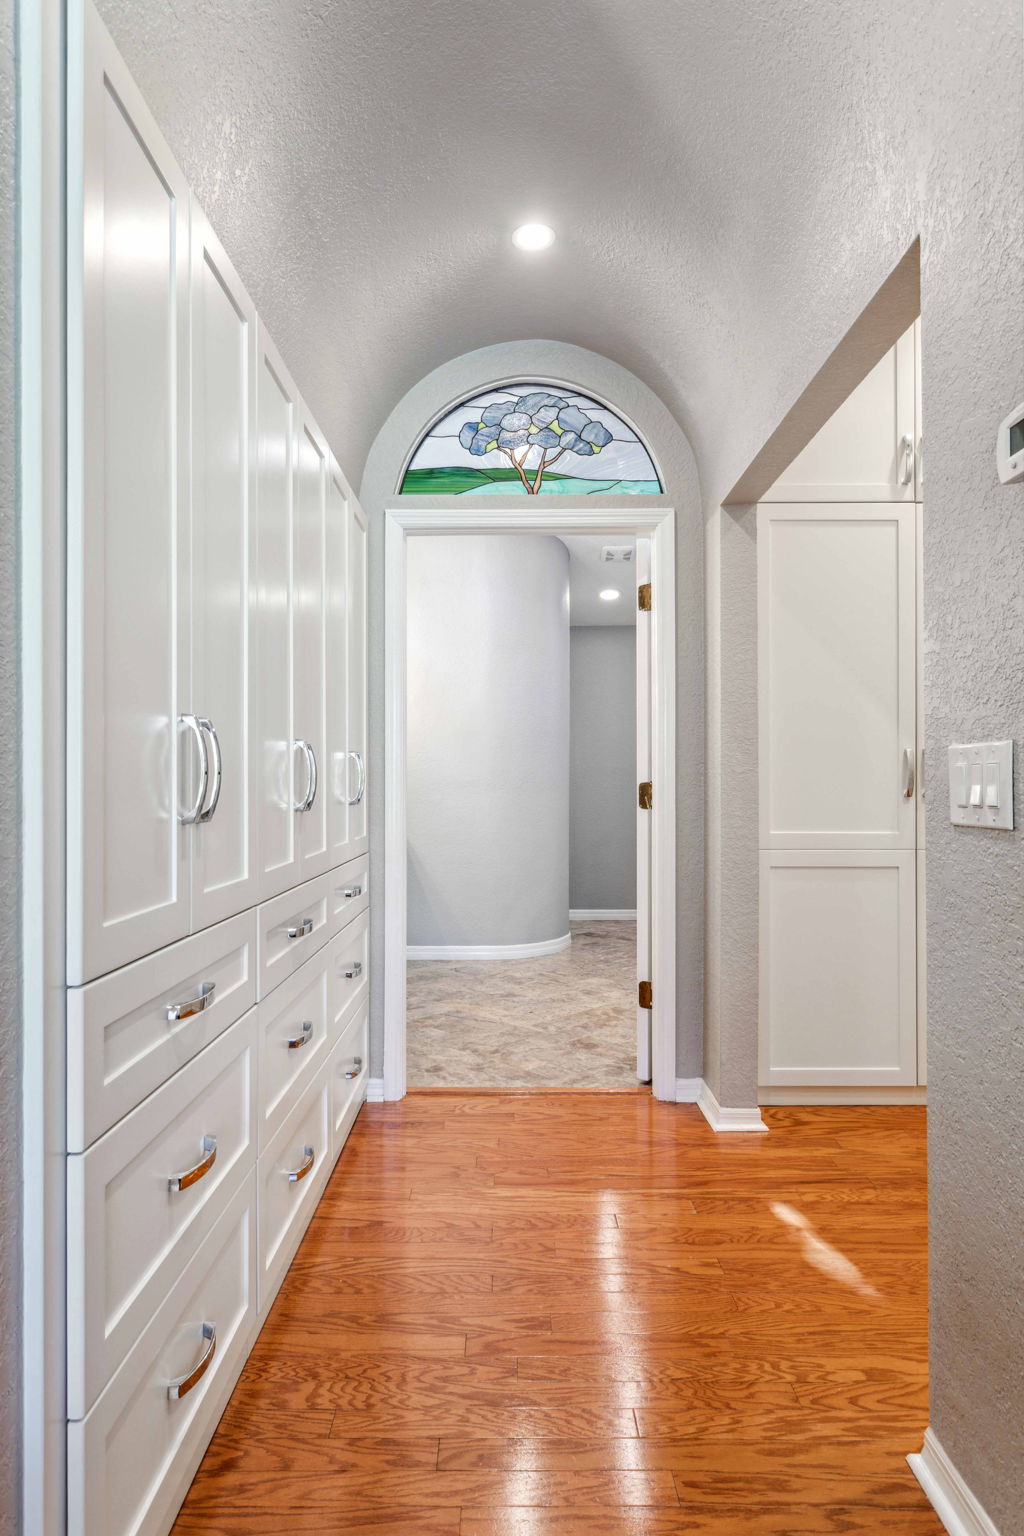 Gorgeous custom built-in closets with barrel ceiling and stained glass window